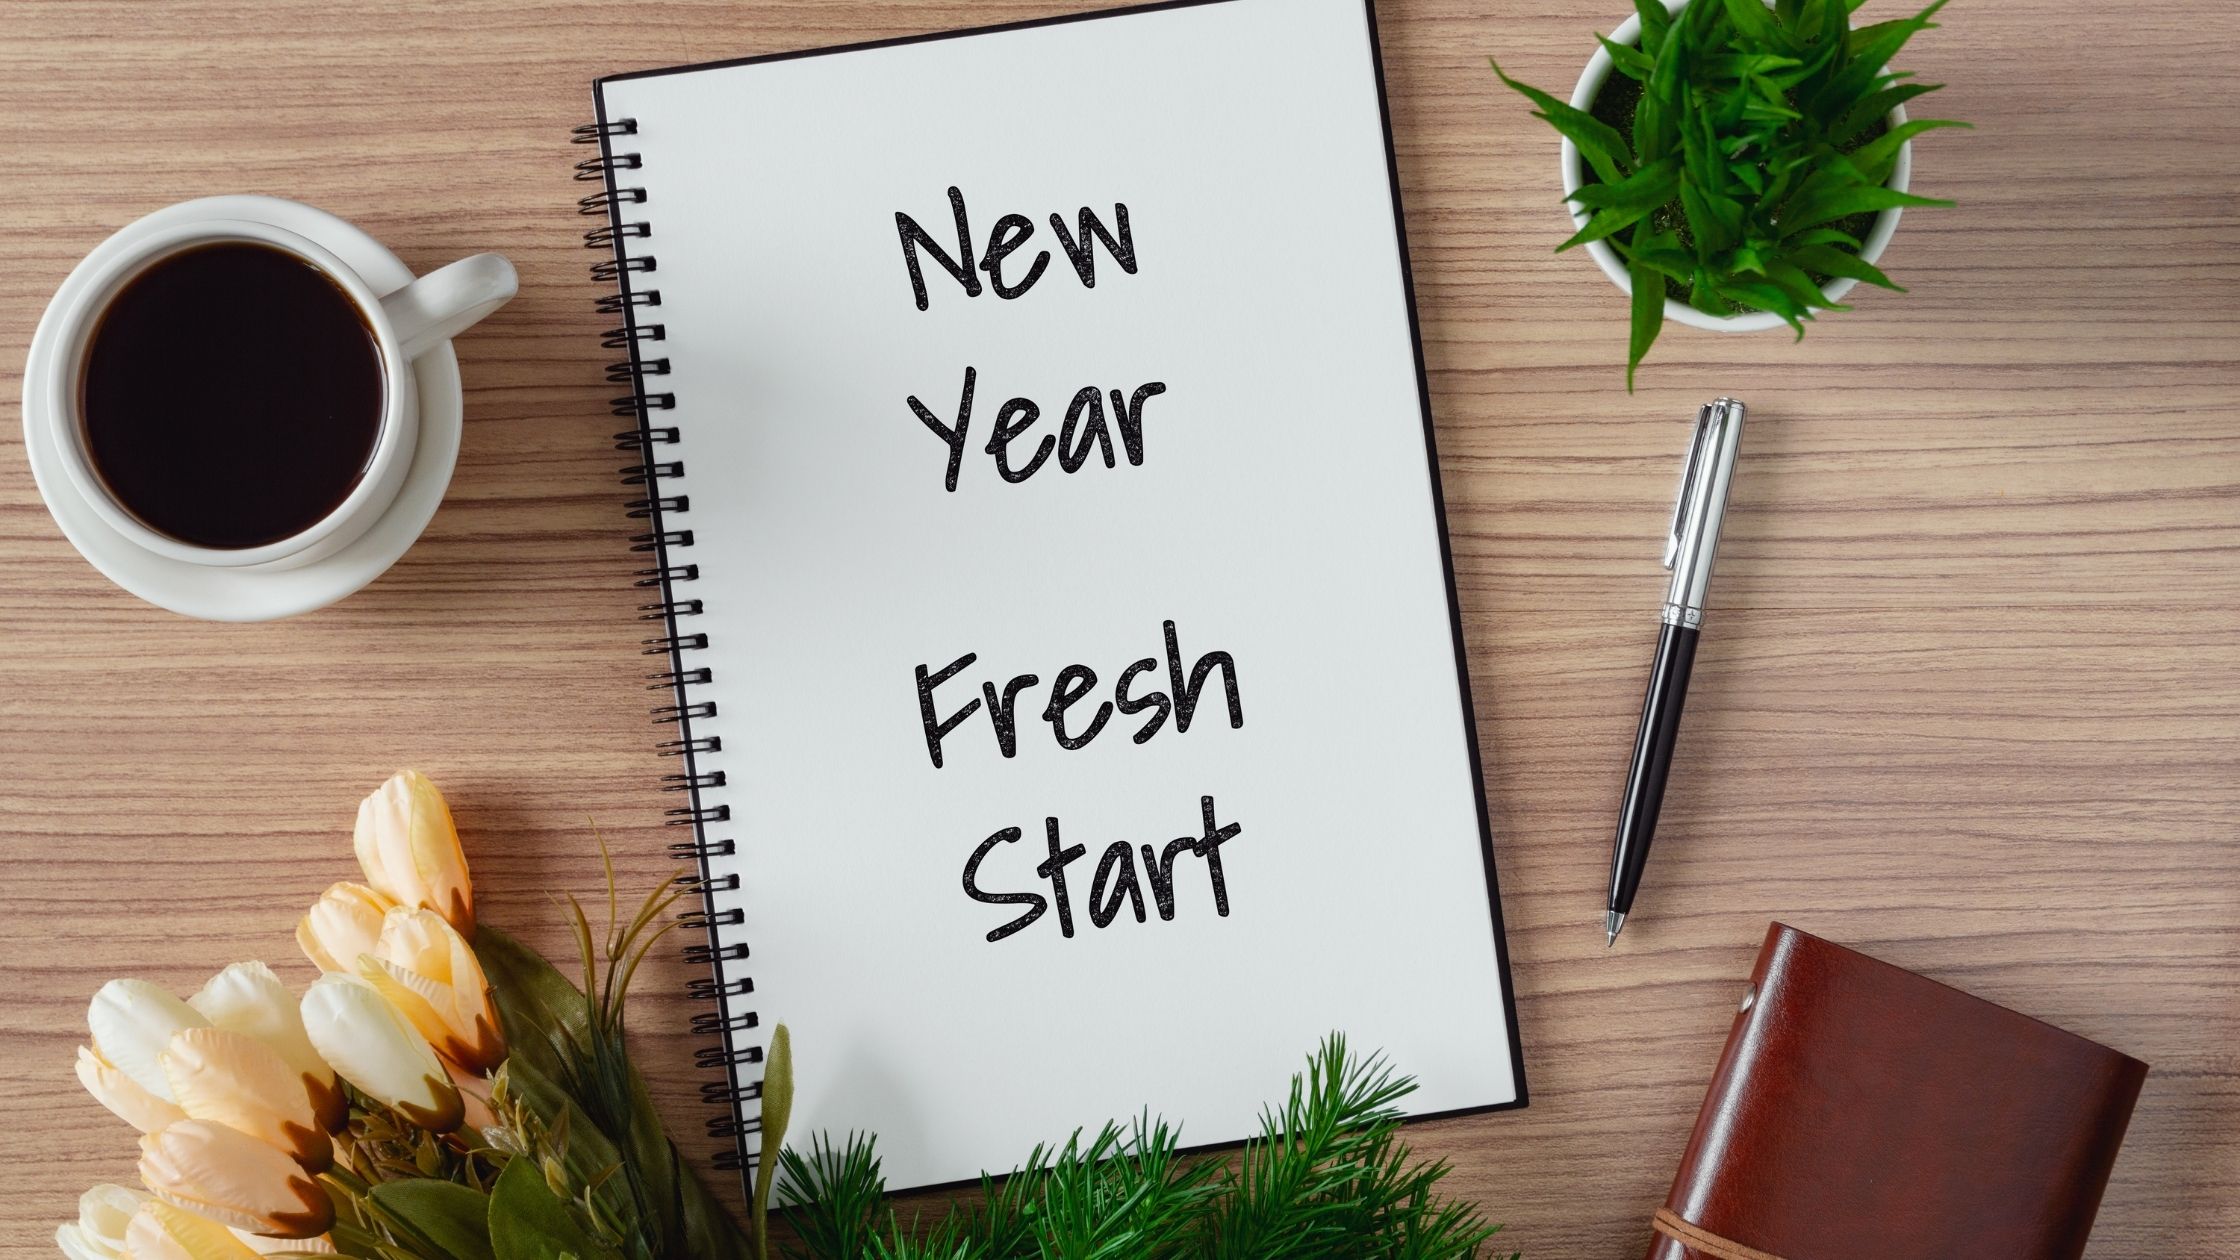 6 Goal Setting Tips for the New Year